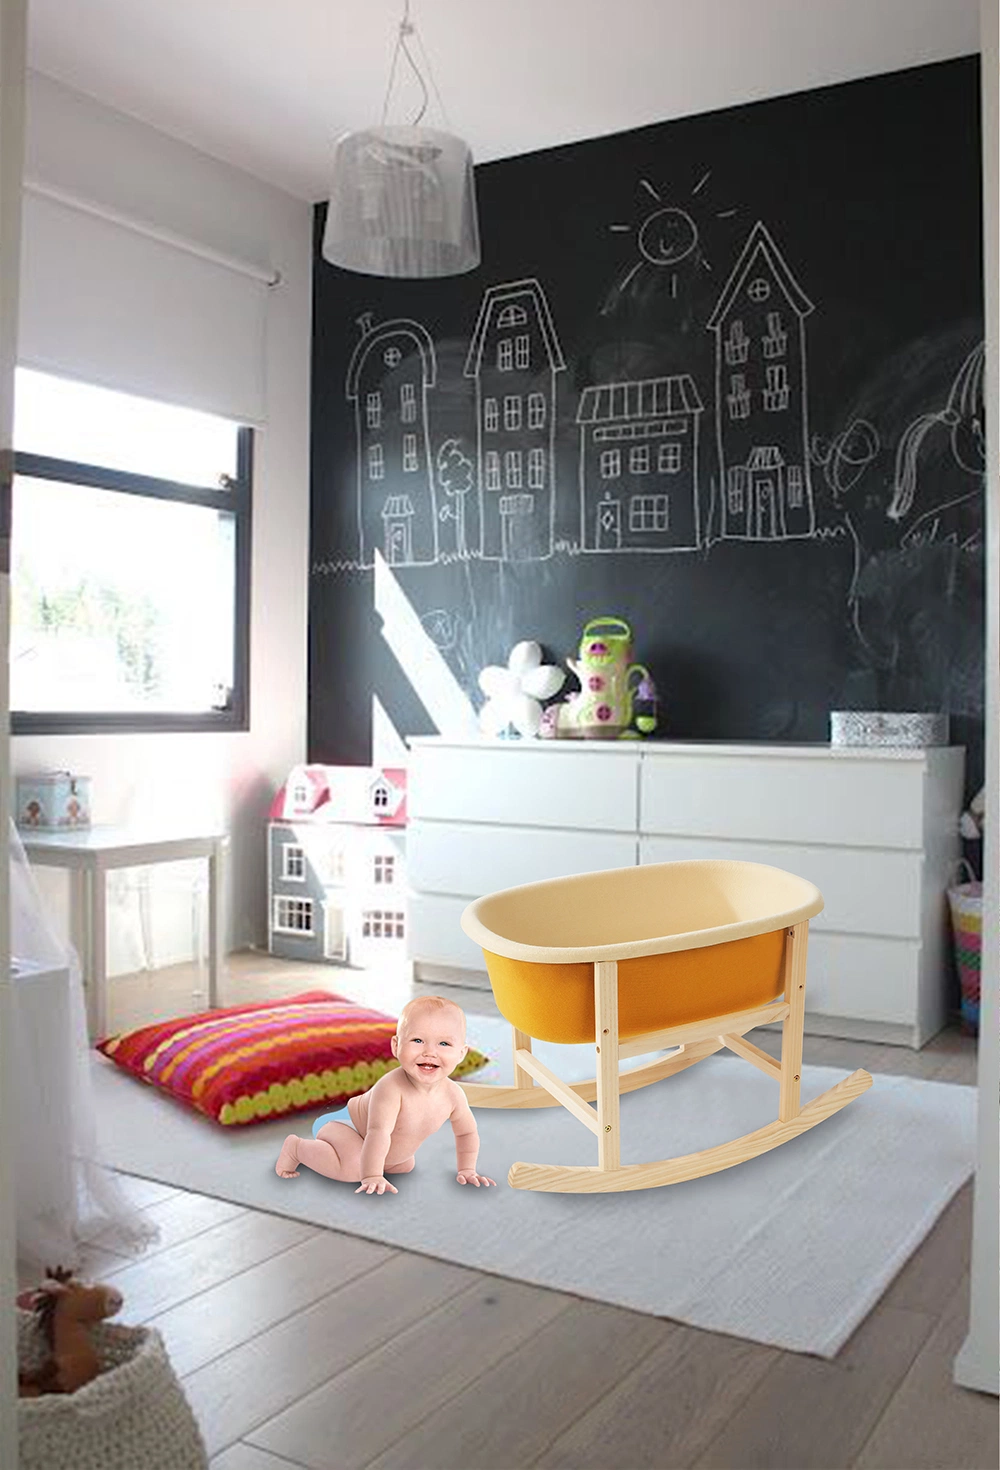 Eco Felt Baby Nursery Bed Side Sleeper Cute Moses Basket with Wooden Rocking Stand